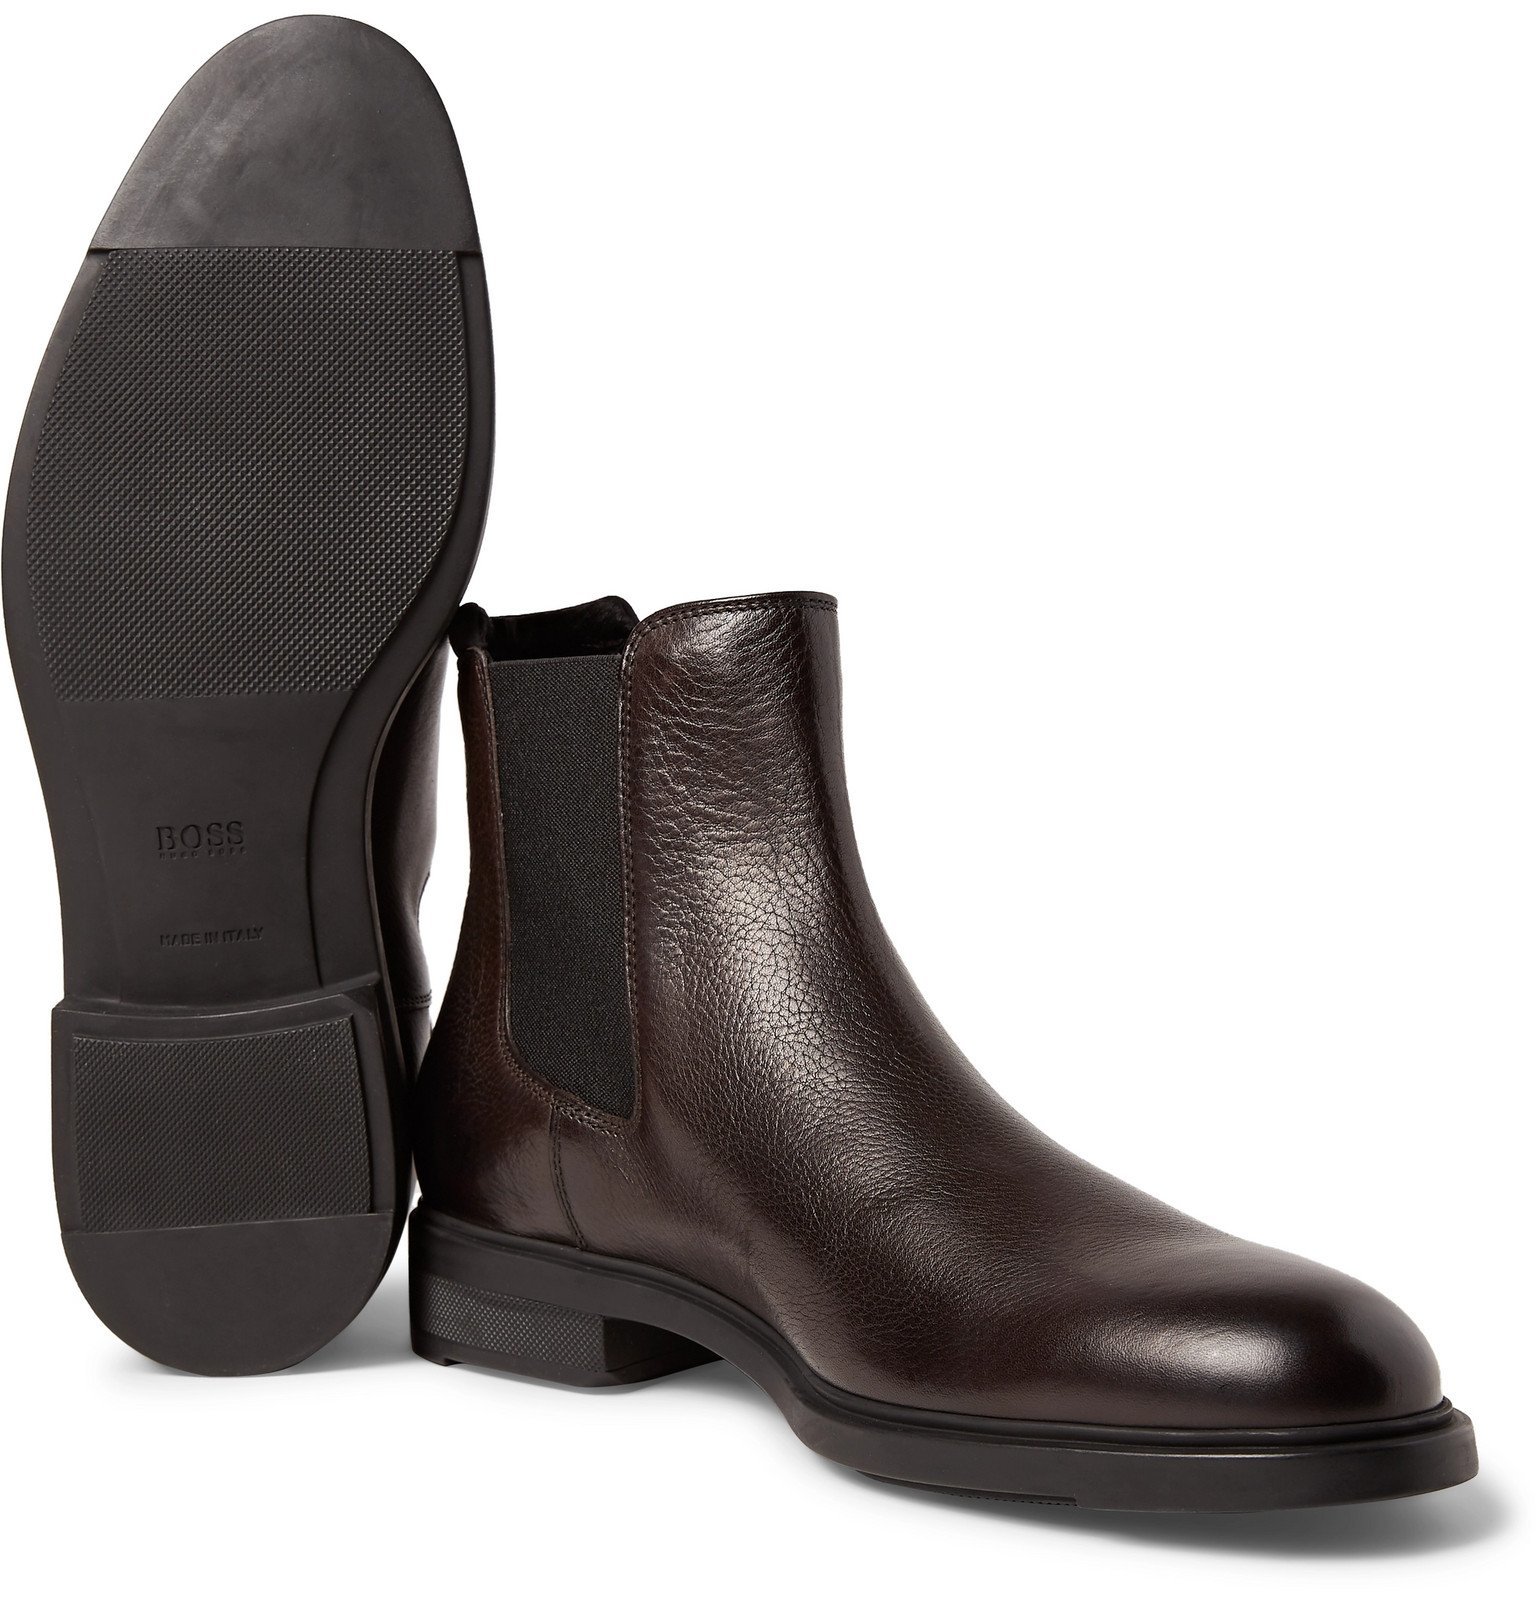 here Conquest mill hugo boss chelsea boots brown Foundation Gentleman ...